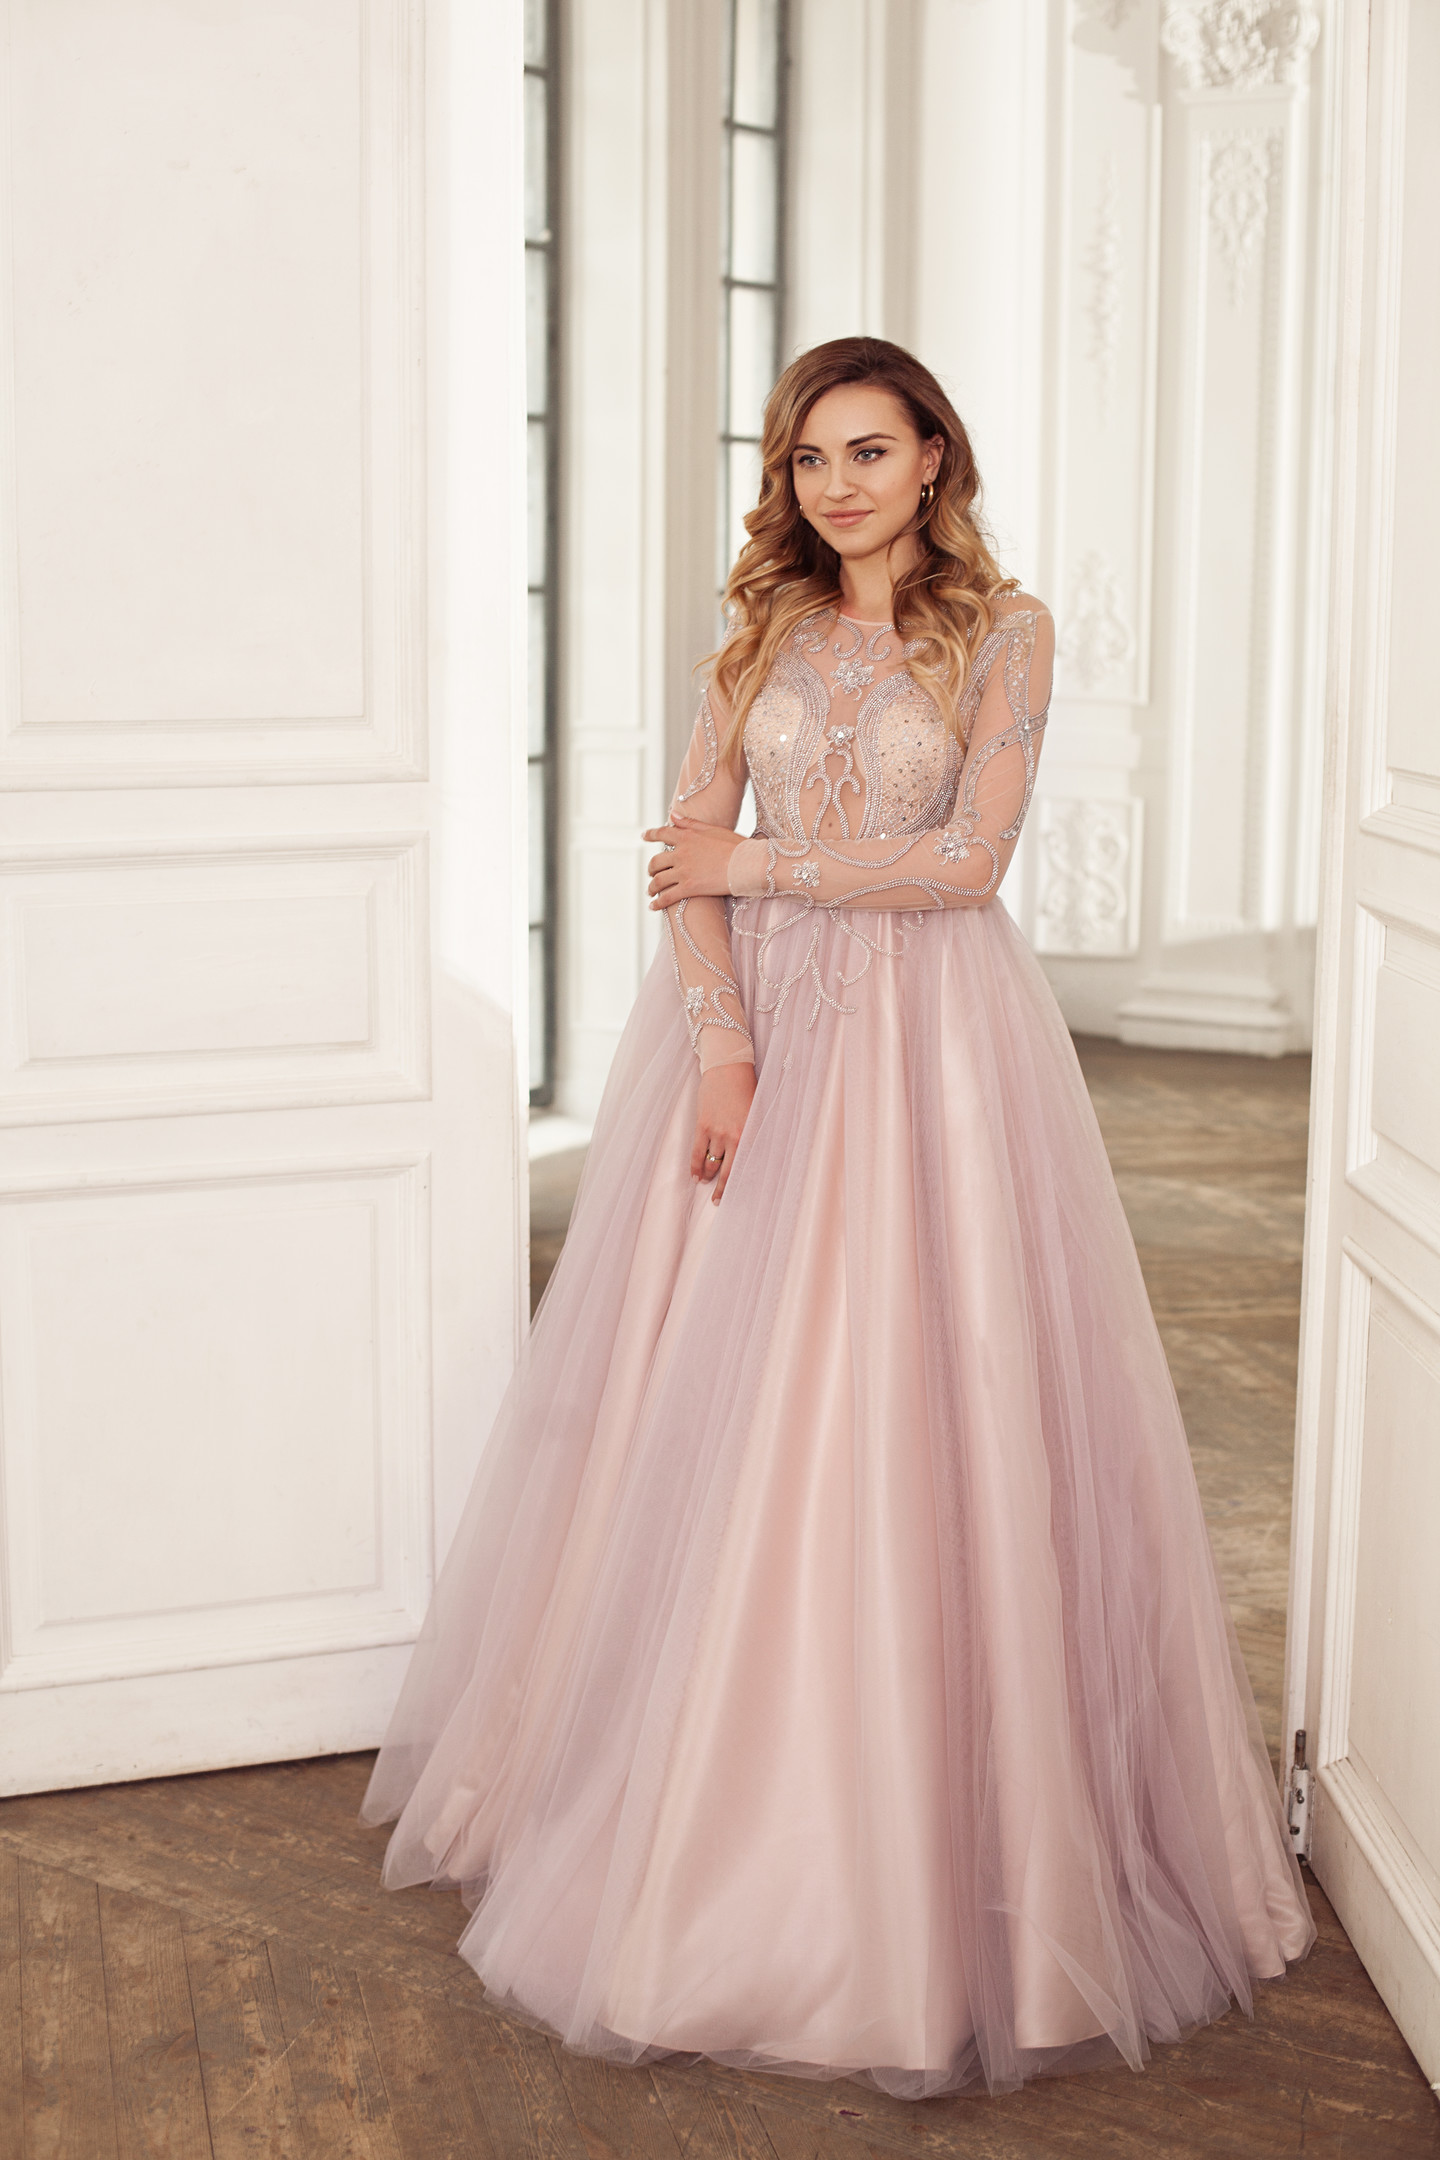 Melanie gown, 2018, couture, dress, evening, pink, tulle, embroidery, A-line, bridal, sleeves, archive